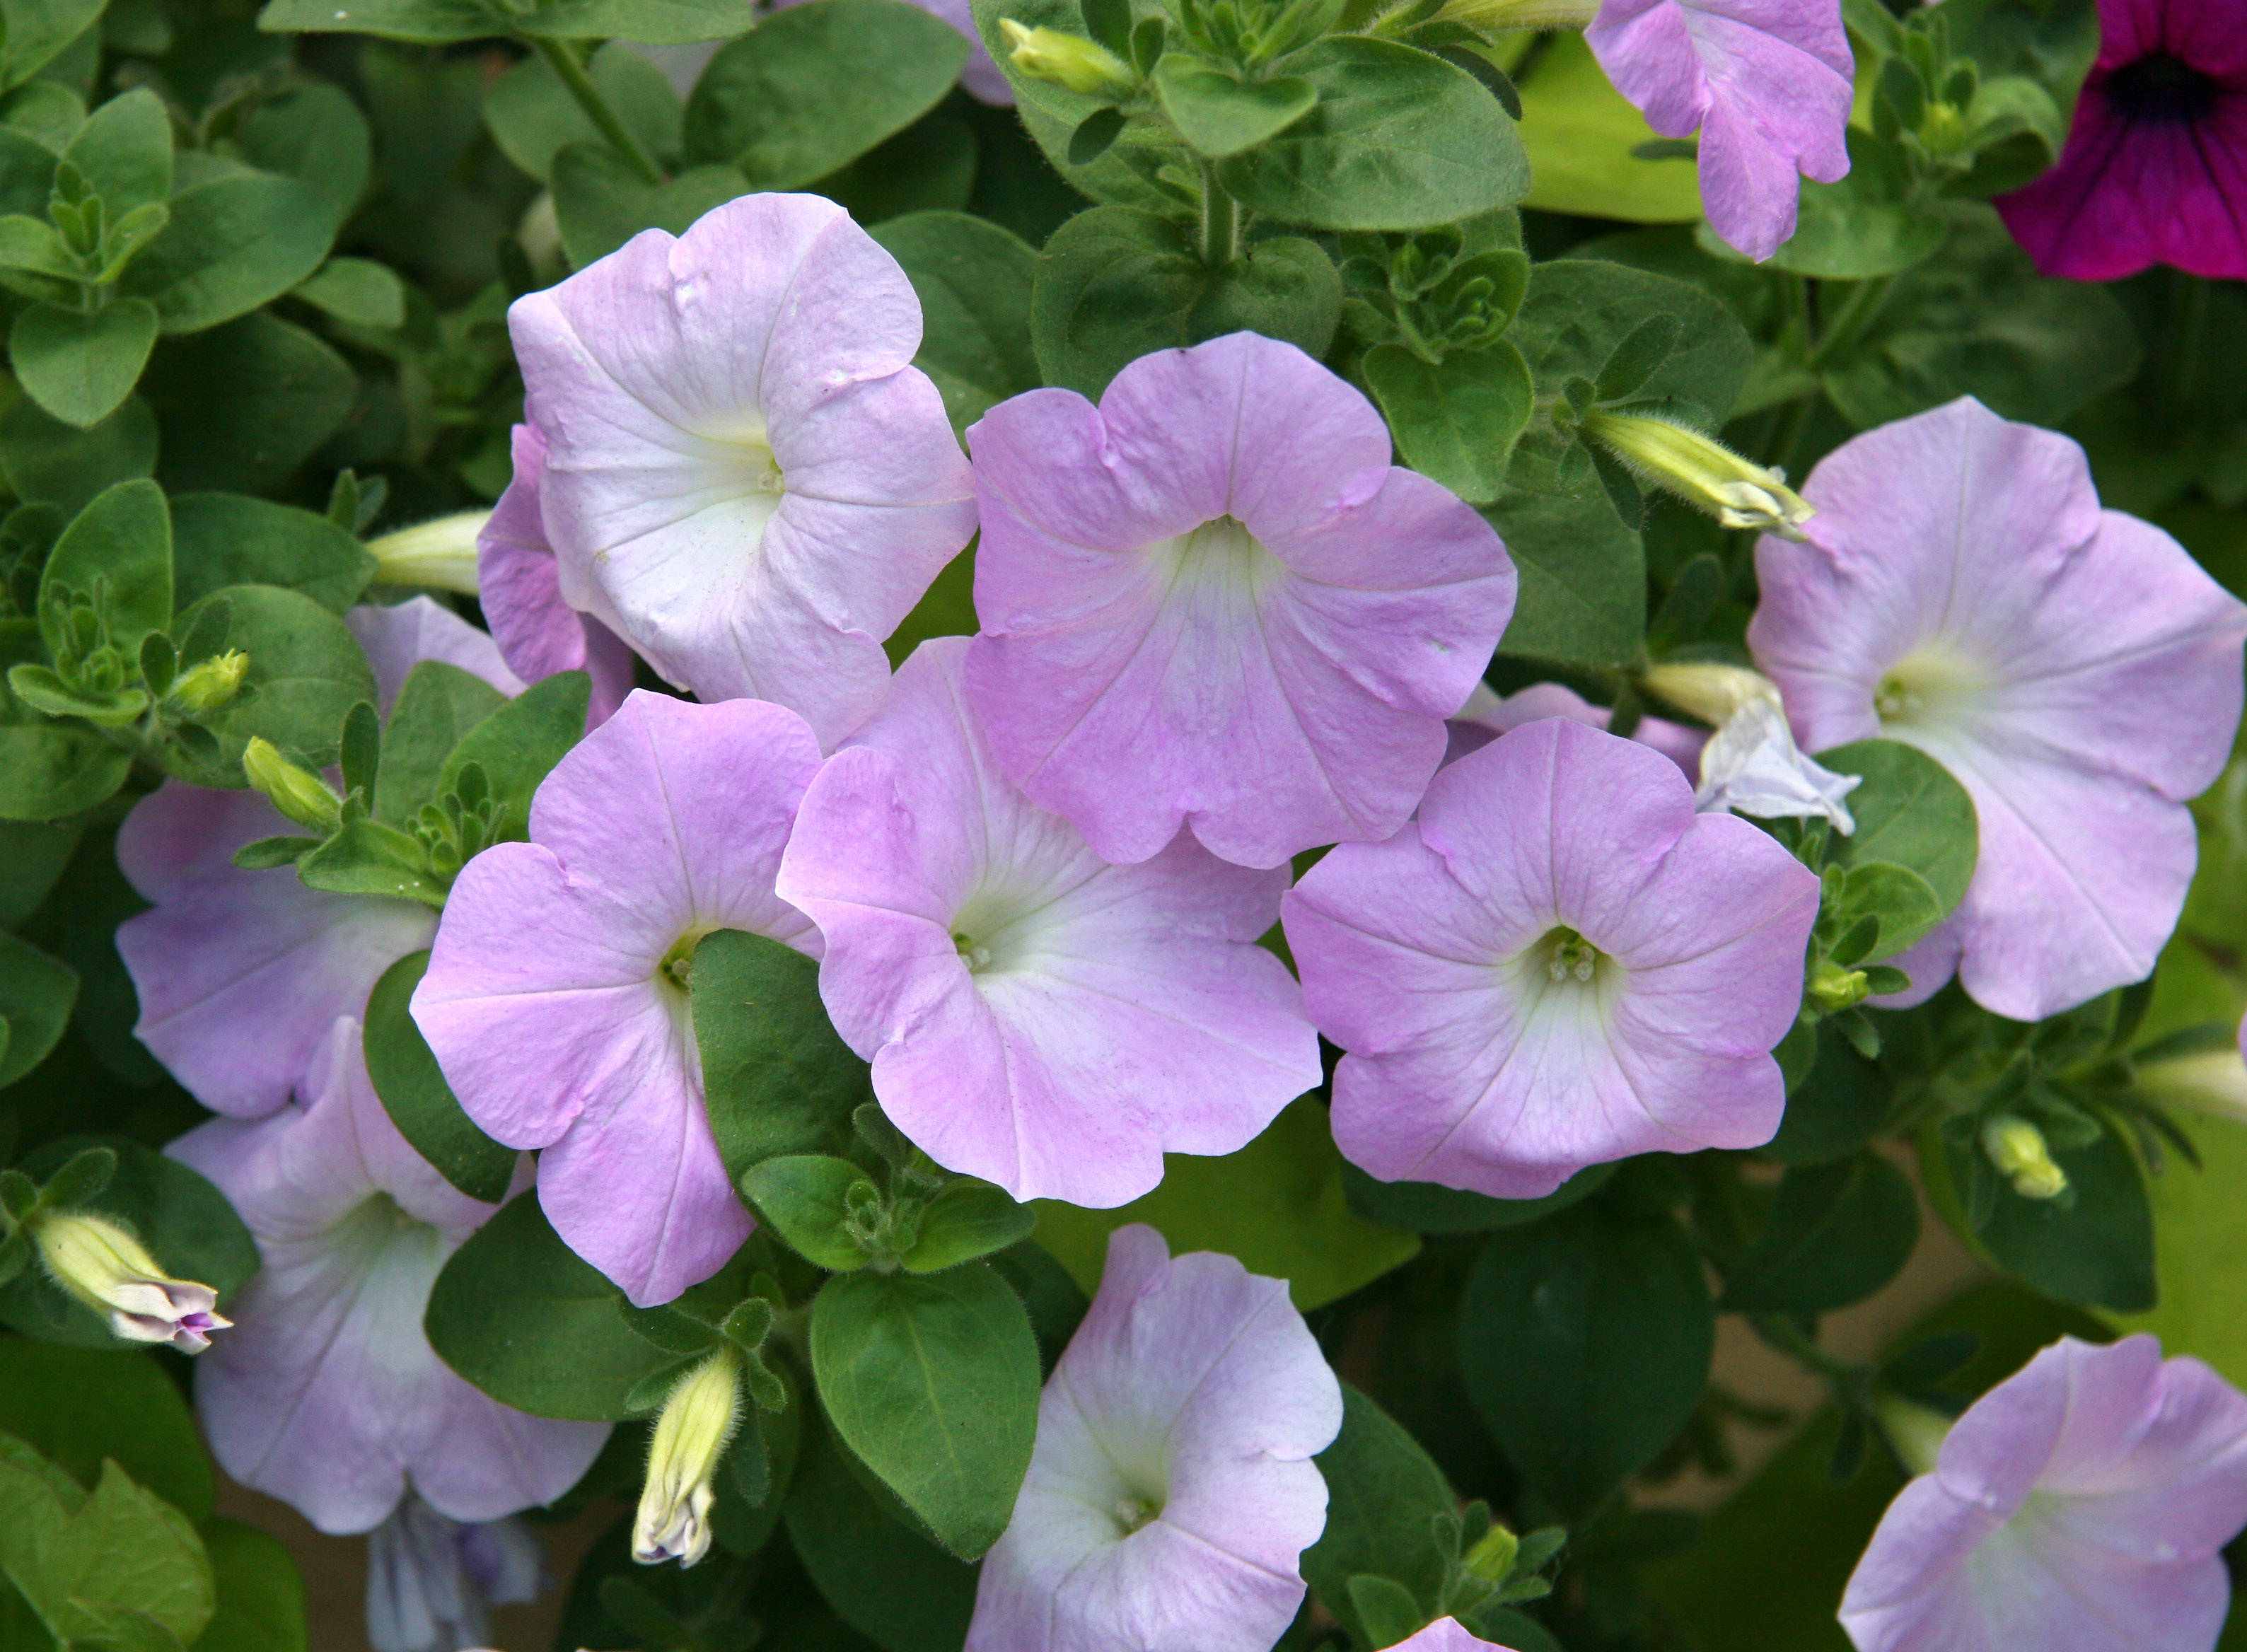 Petunias at the Entrance to the Catholic Center